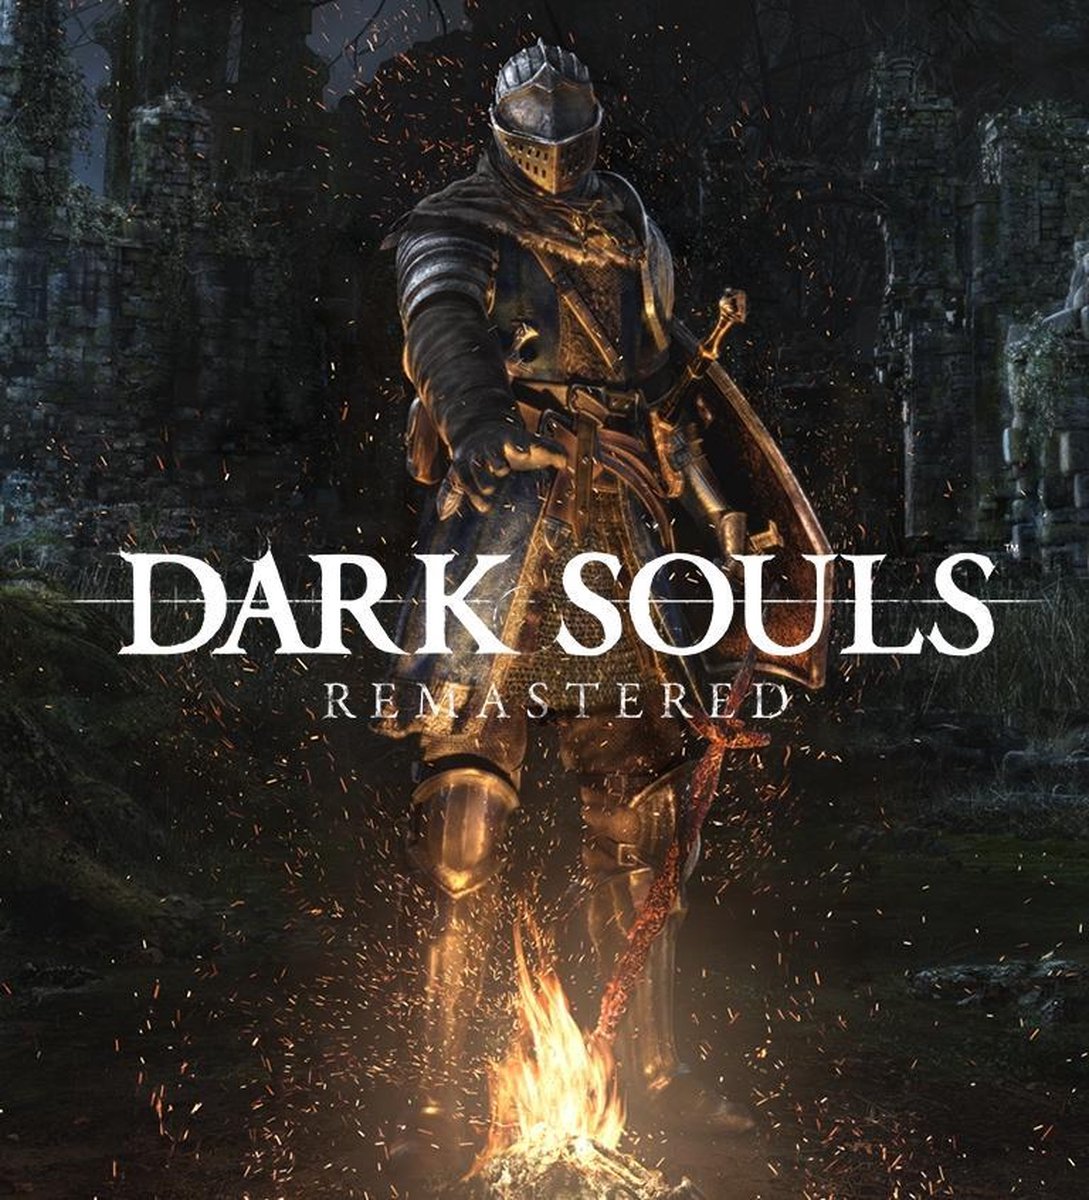 bol-sony-dark-souls-remastered-ps4-video-game-playstation-4-games